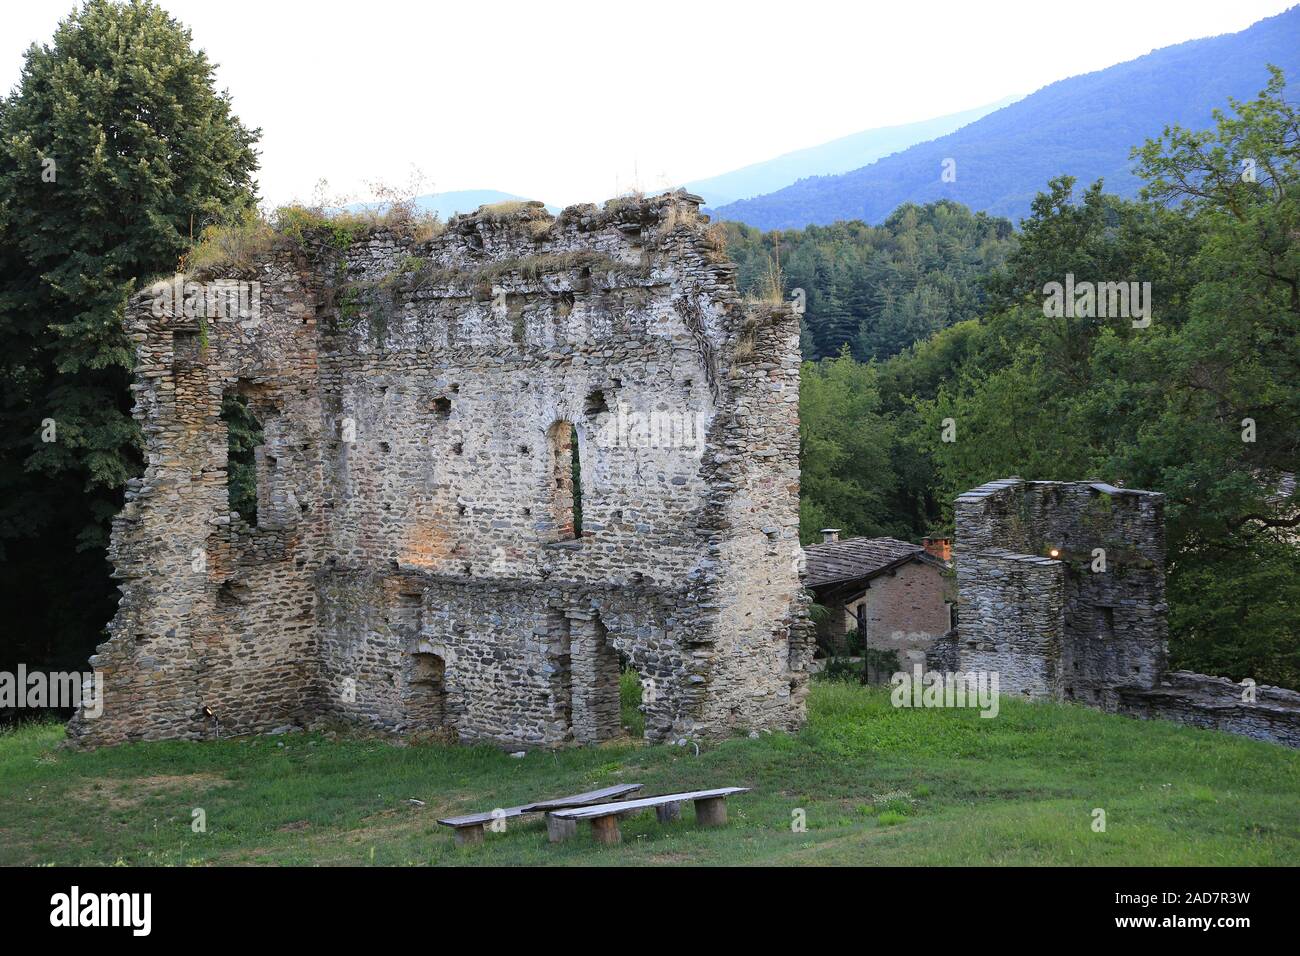 Remains of ancient walls at Castello di Bagnolo Castle, Italy, Piedmont. Stock Photo